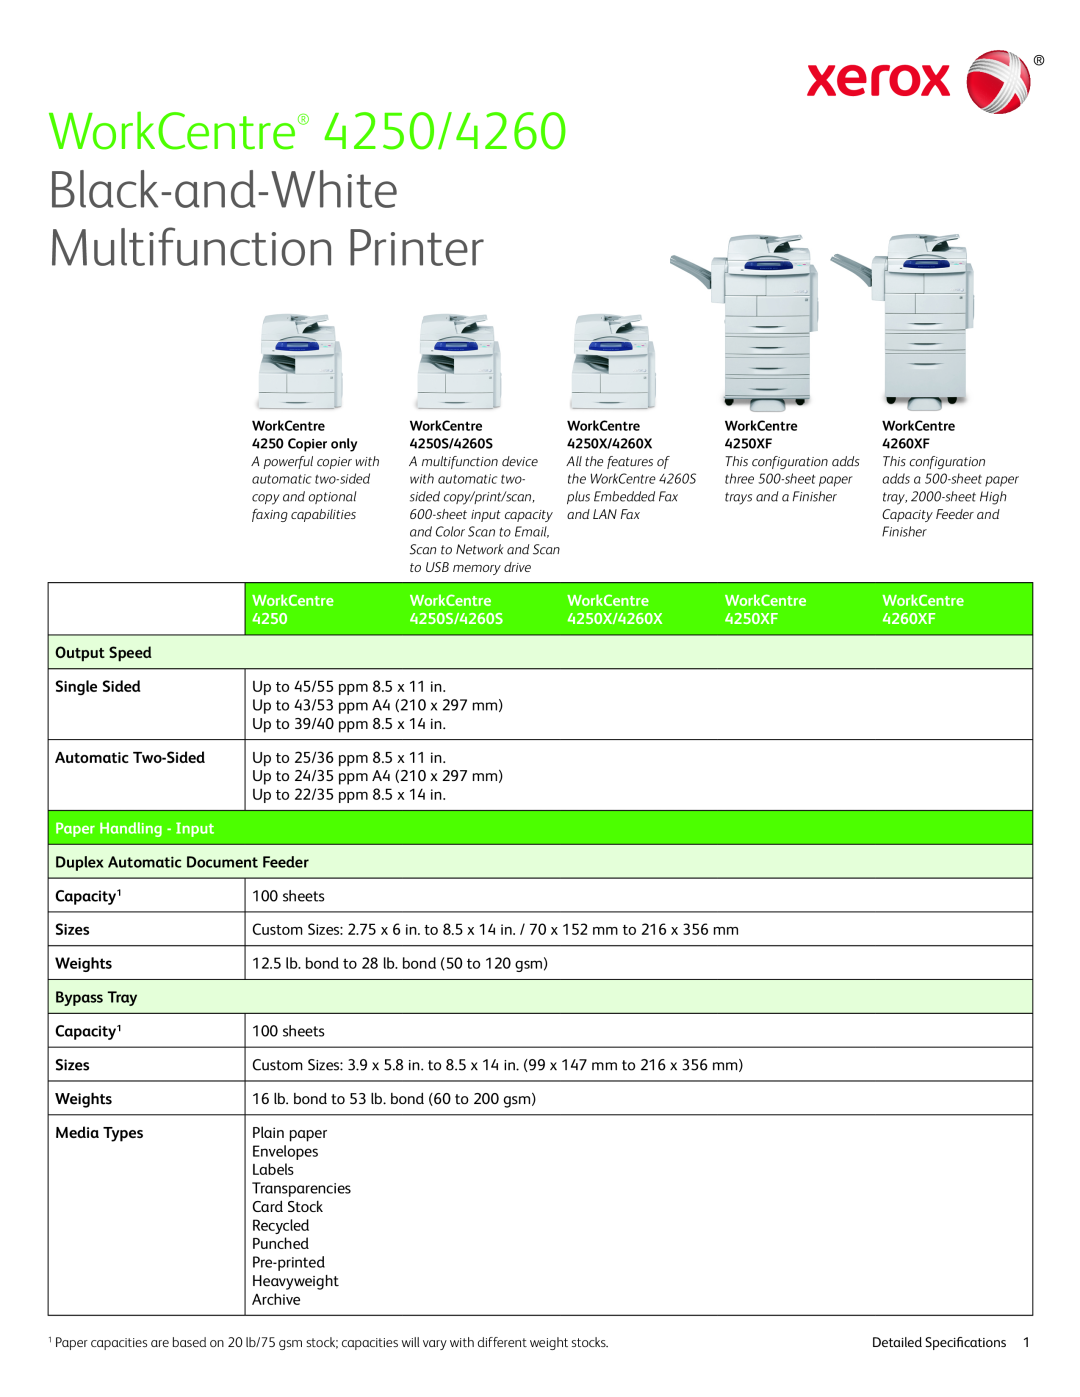 Xerox specifications WorkCentre 4250/4260, Black-and-White Multifunction Printer 